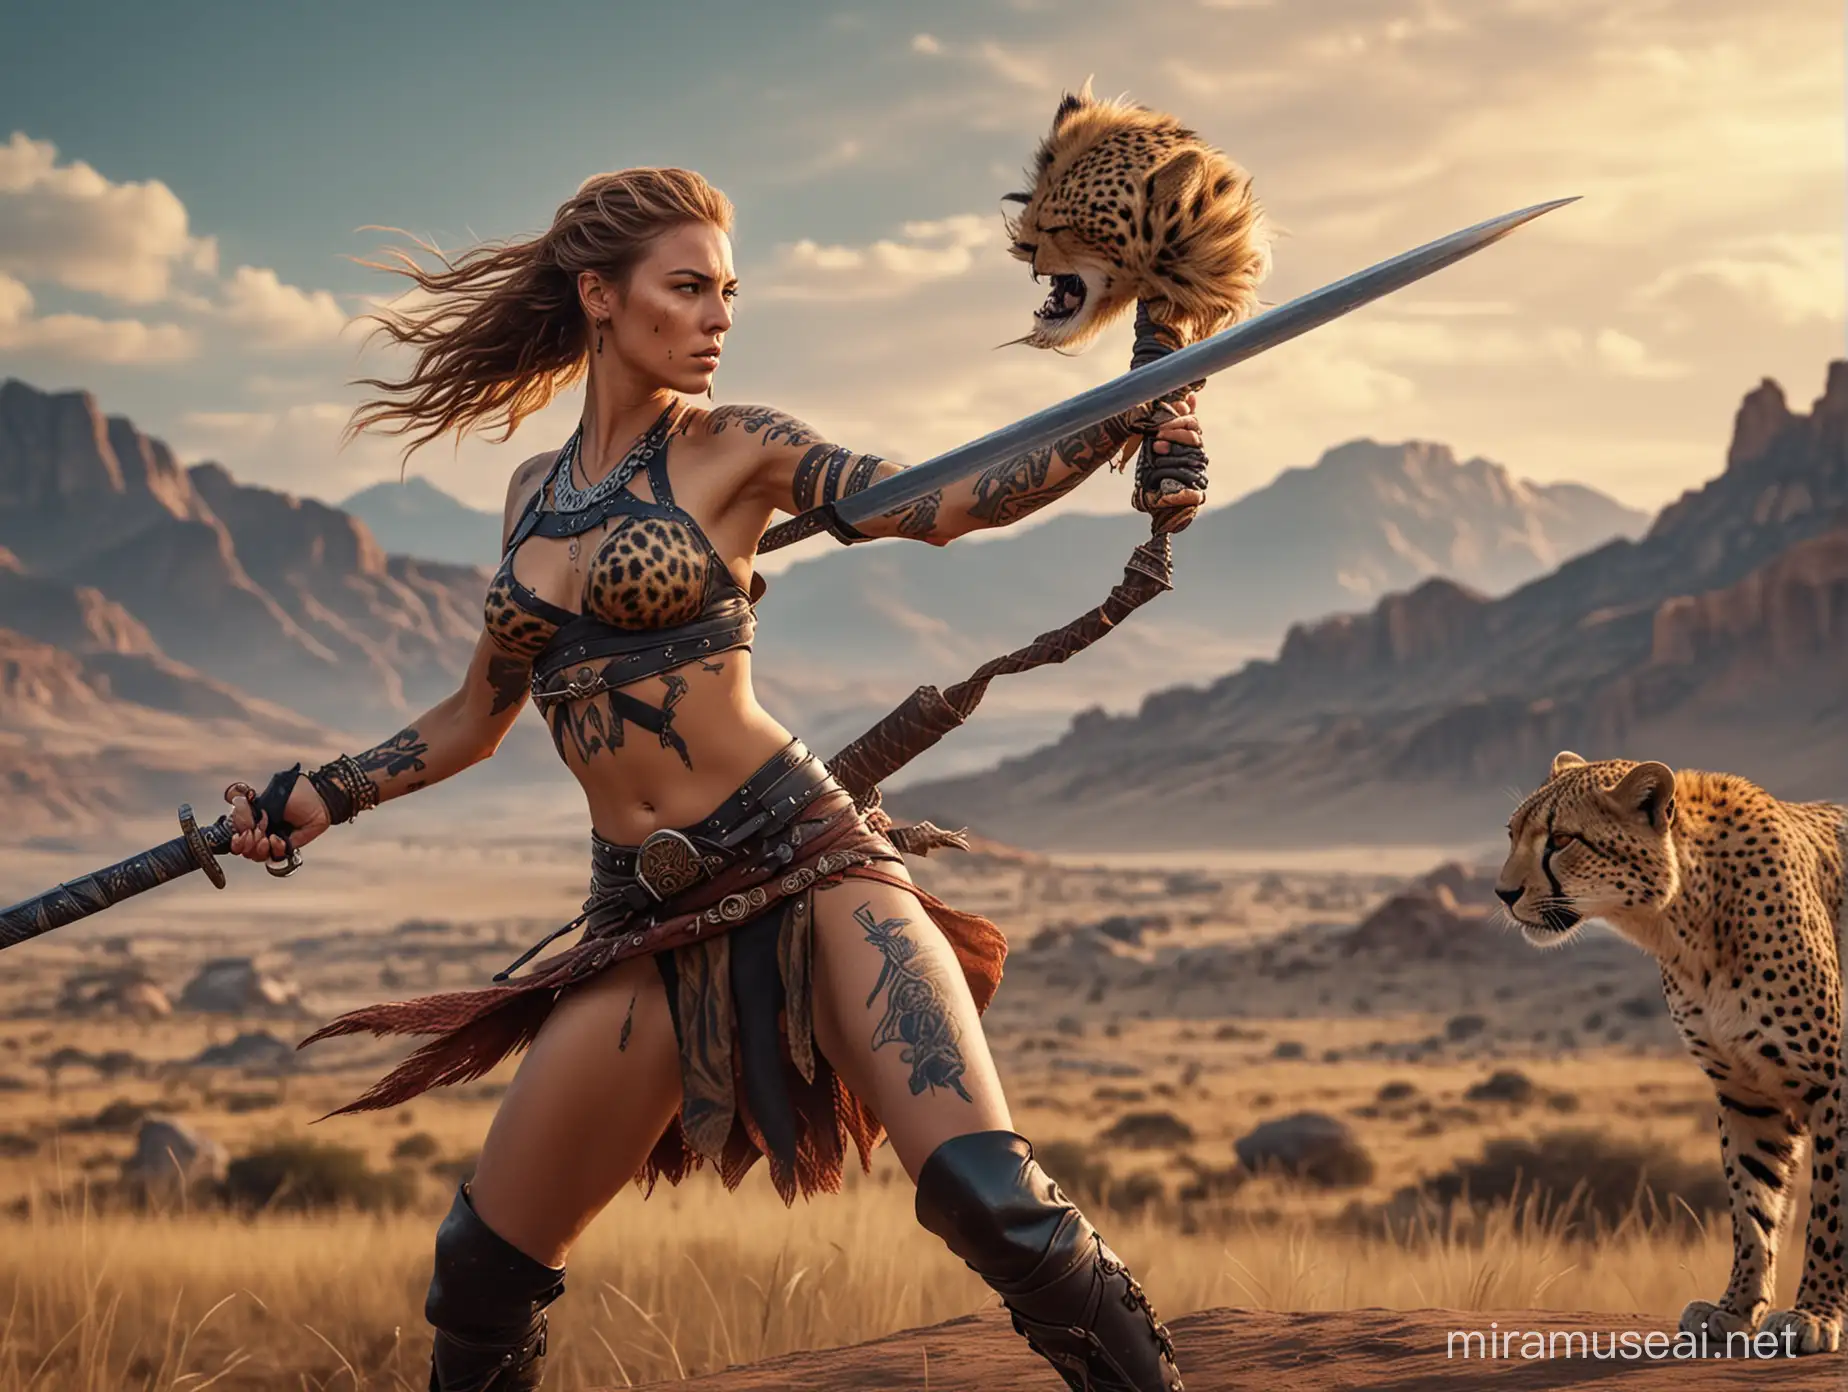 Warrior Caucasian woman, has colored Tattoos, Holding Sword, She is fighting a Cheetah, Full Details, cinematic, Action, Long Shoot, Dramatic landscape, 8k resolution, Oil painting, Baroque style